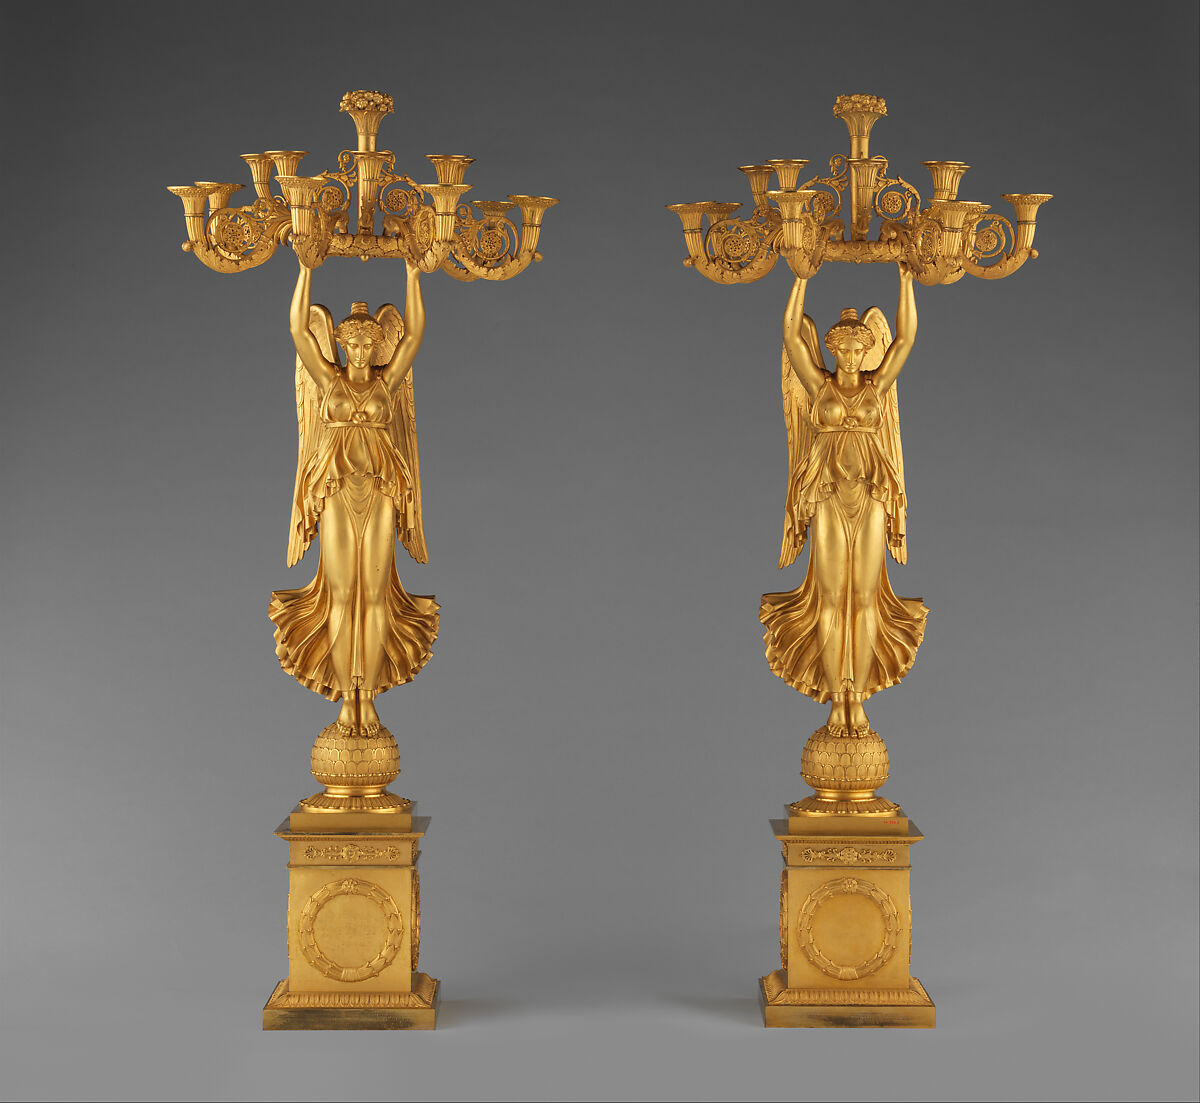 Pair of candelabra with Winged Victories, Pierre Philippe Thomire (French, Paris 1751–1843 Paris), Gilt bronze, French 